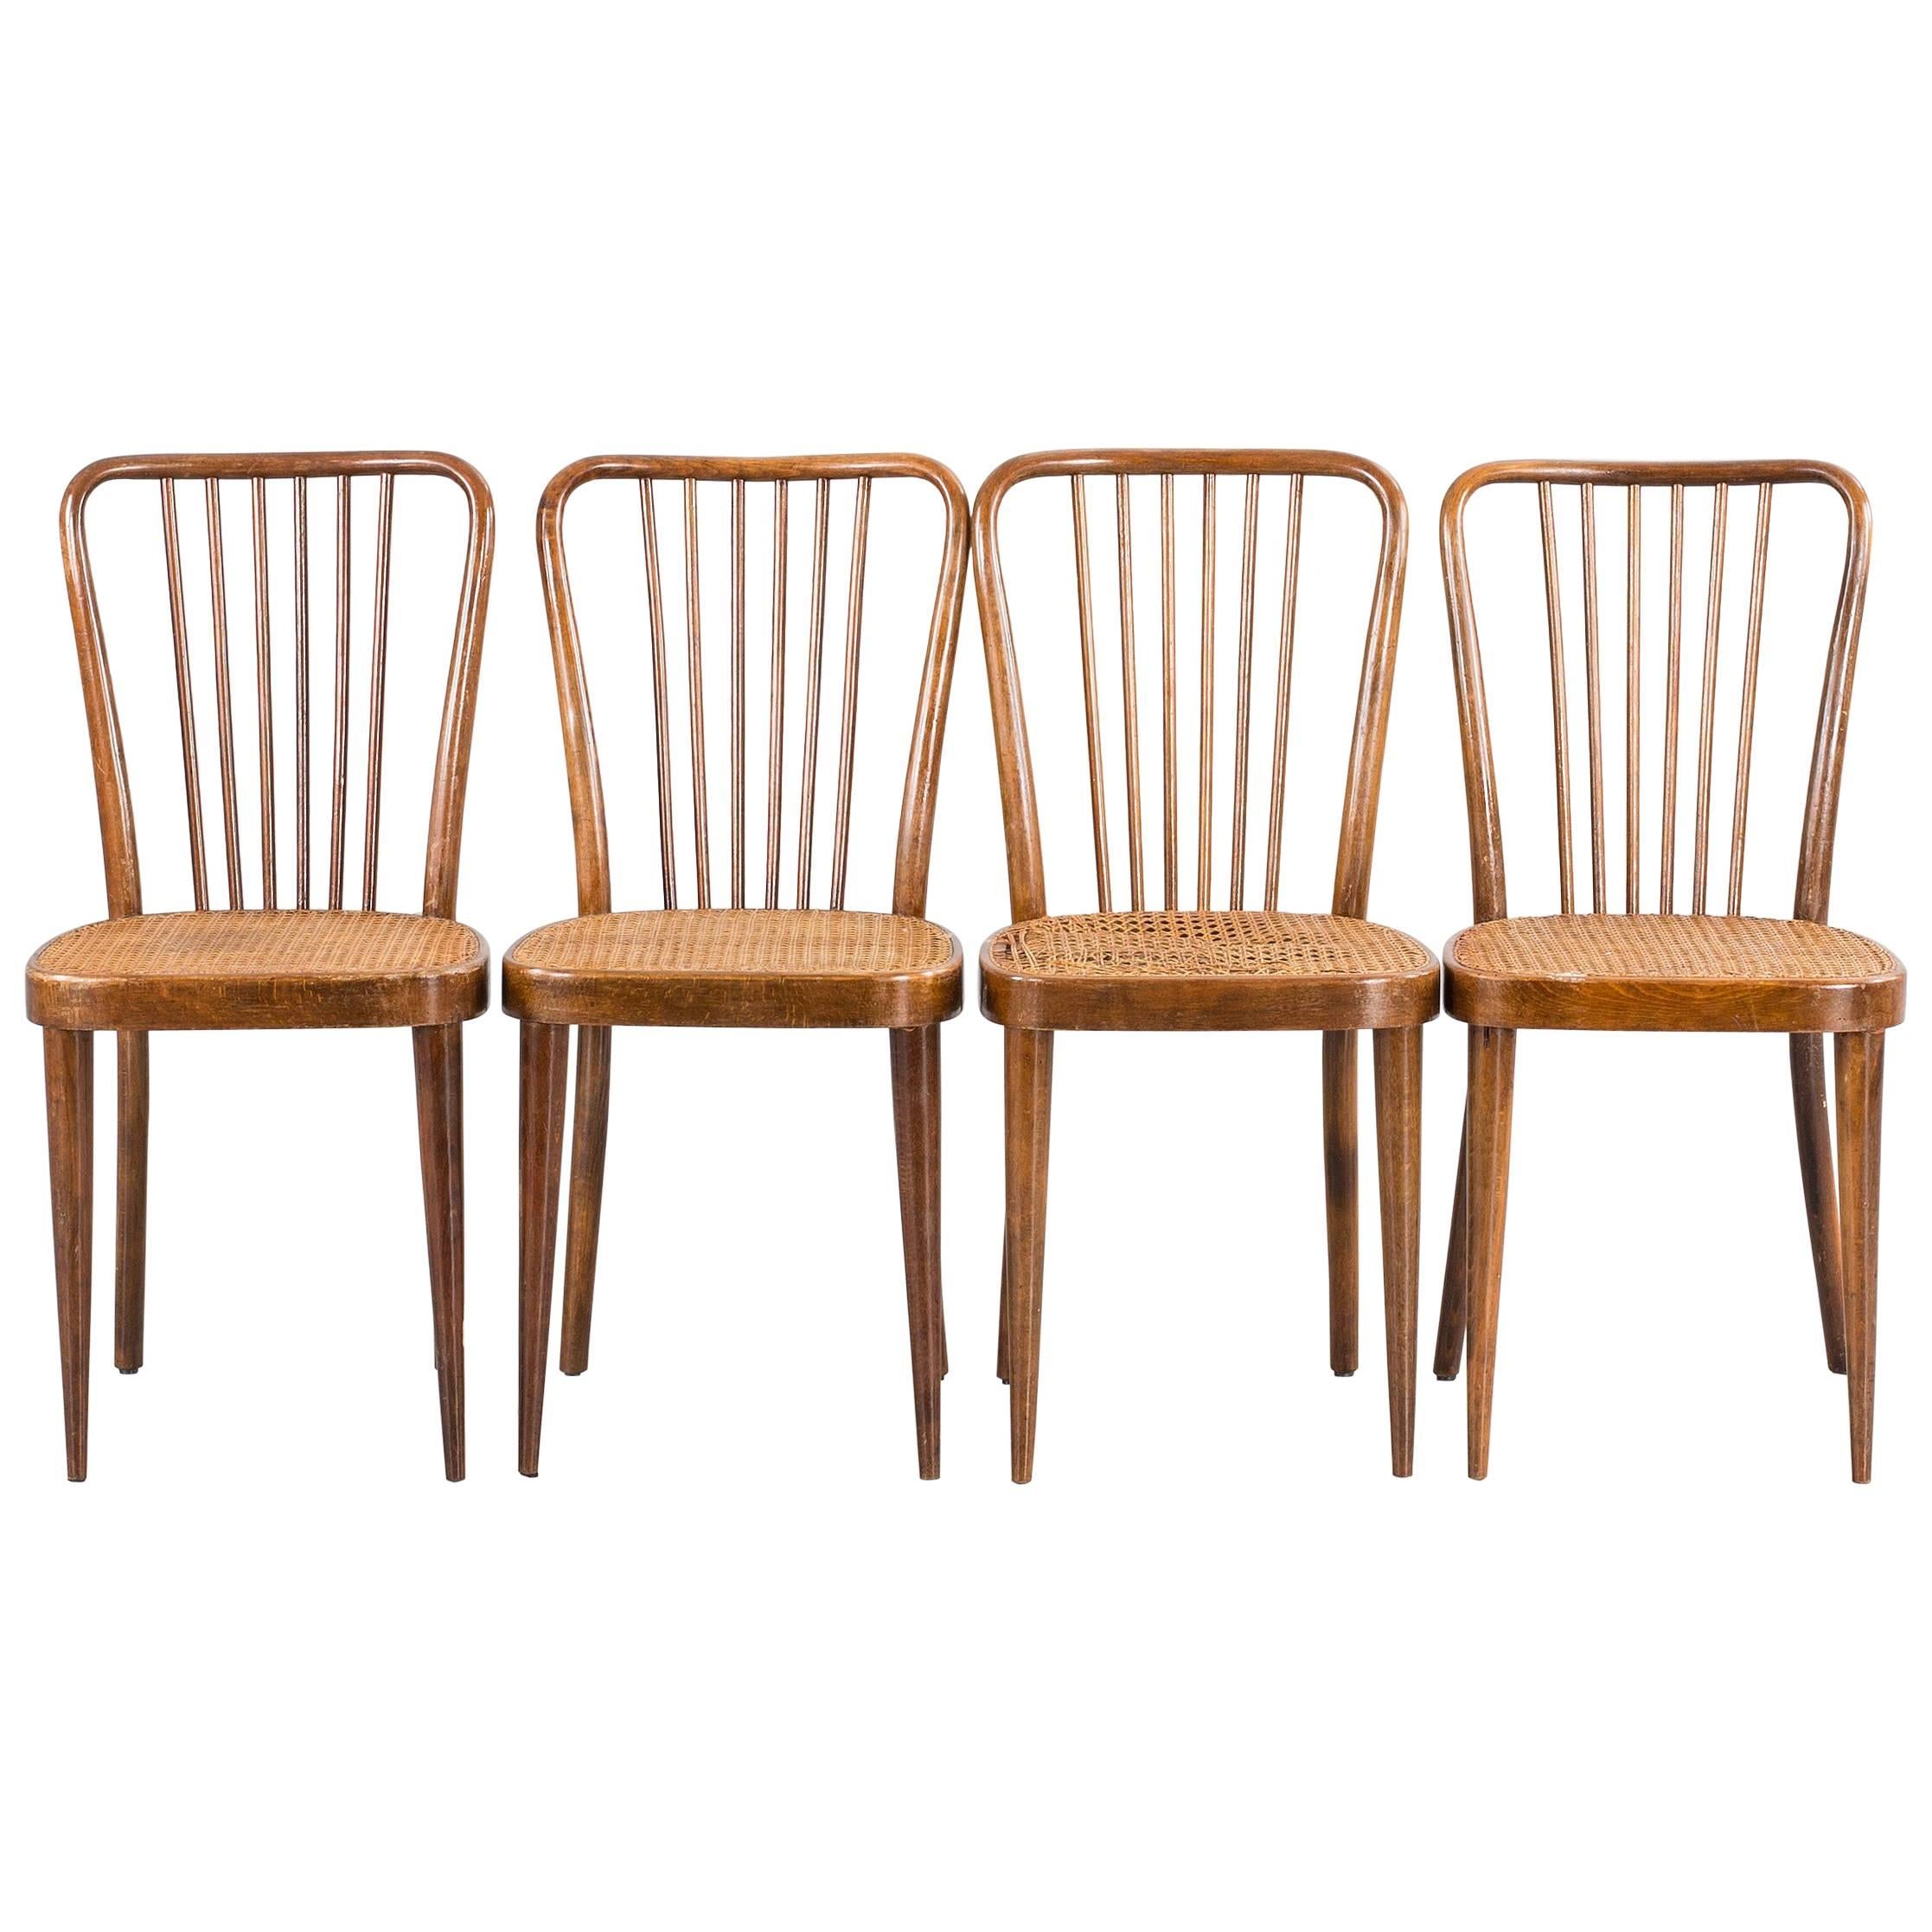 Set of Four Thonet Dining Chairs by Josef Frank